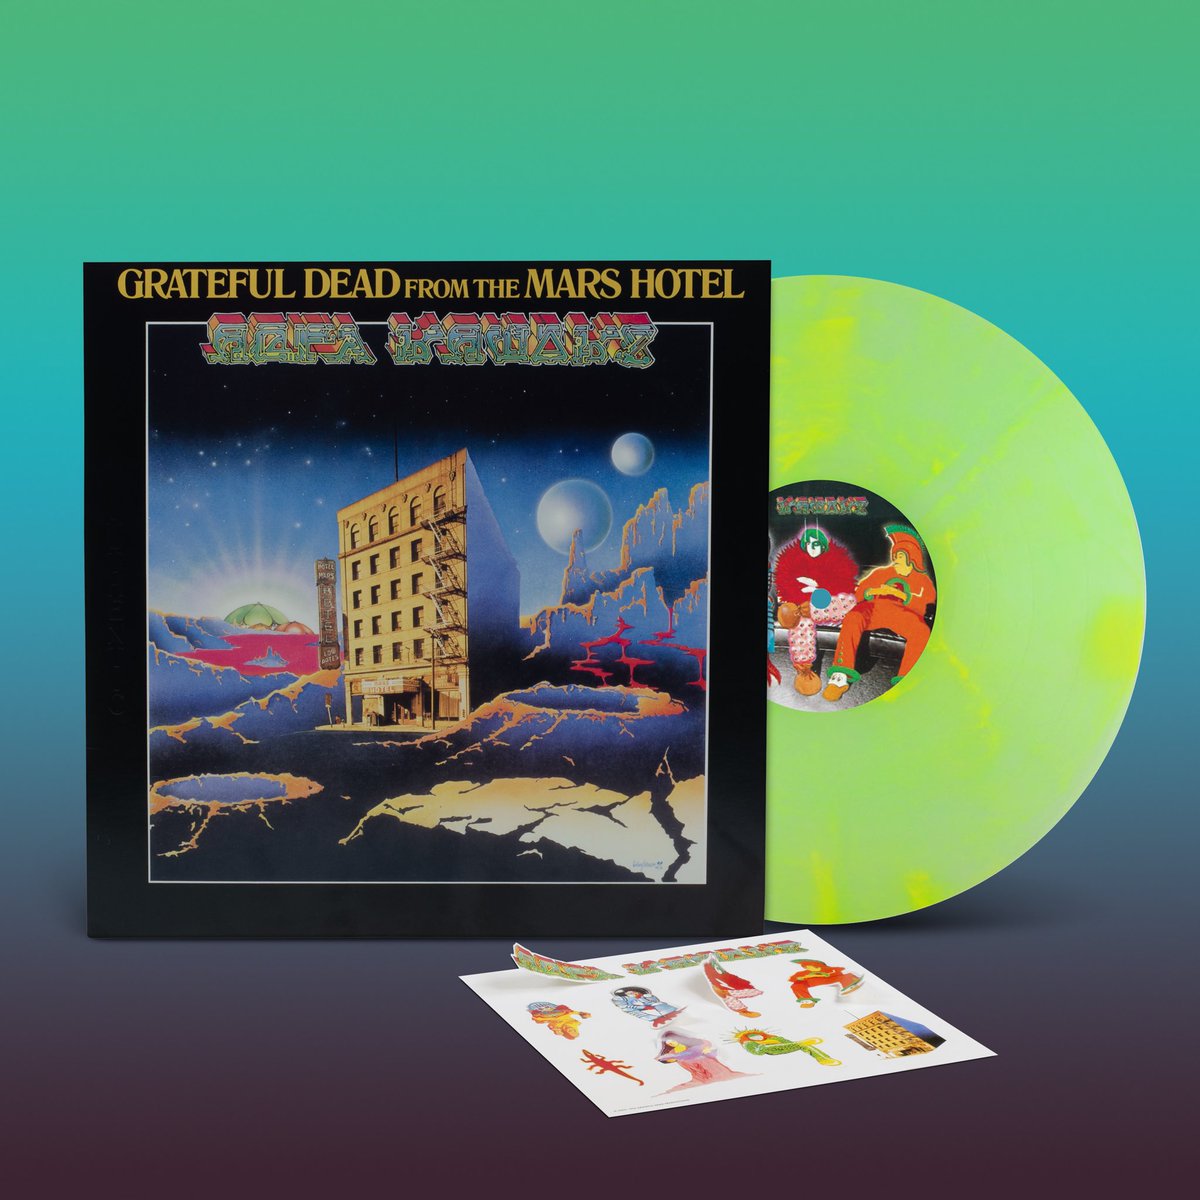 Hey now, fewer than a hundred of those sweet 'Ugly Rumors' Custom Vinyl pressings for the 50th Anniversary Remaster of 'From The Mars Hotel' left. Head over to Dead.net to claim yours before they're gone for good.